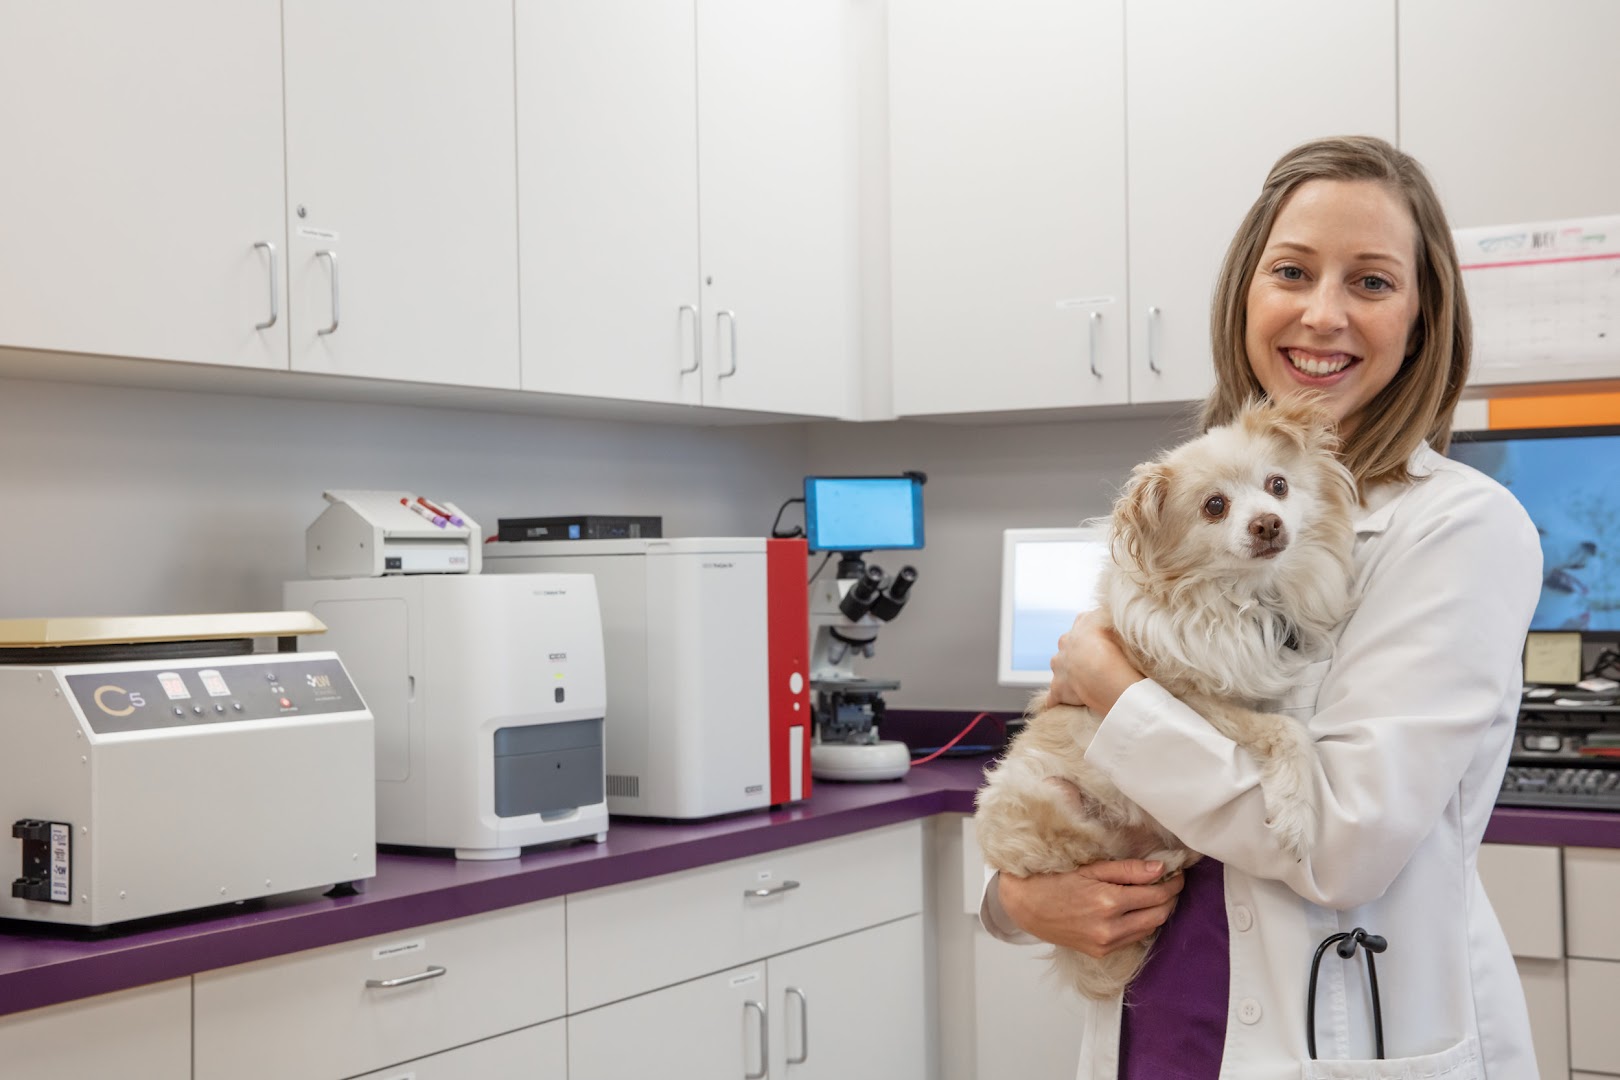 Wagly Veterinary Hospital & Pet Campus | RSM